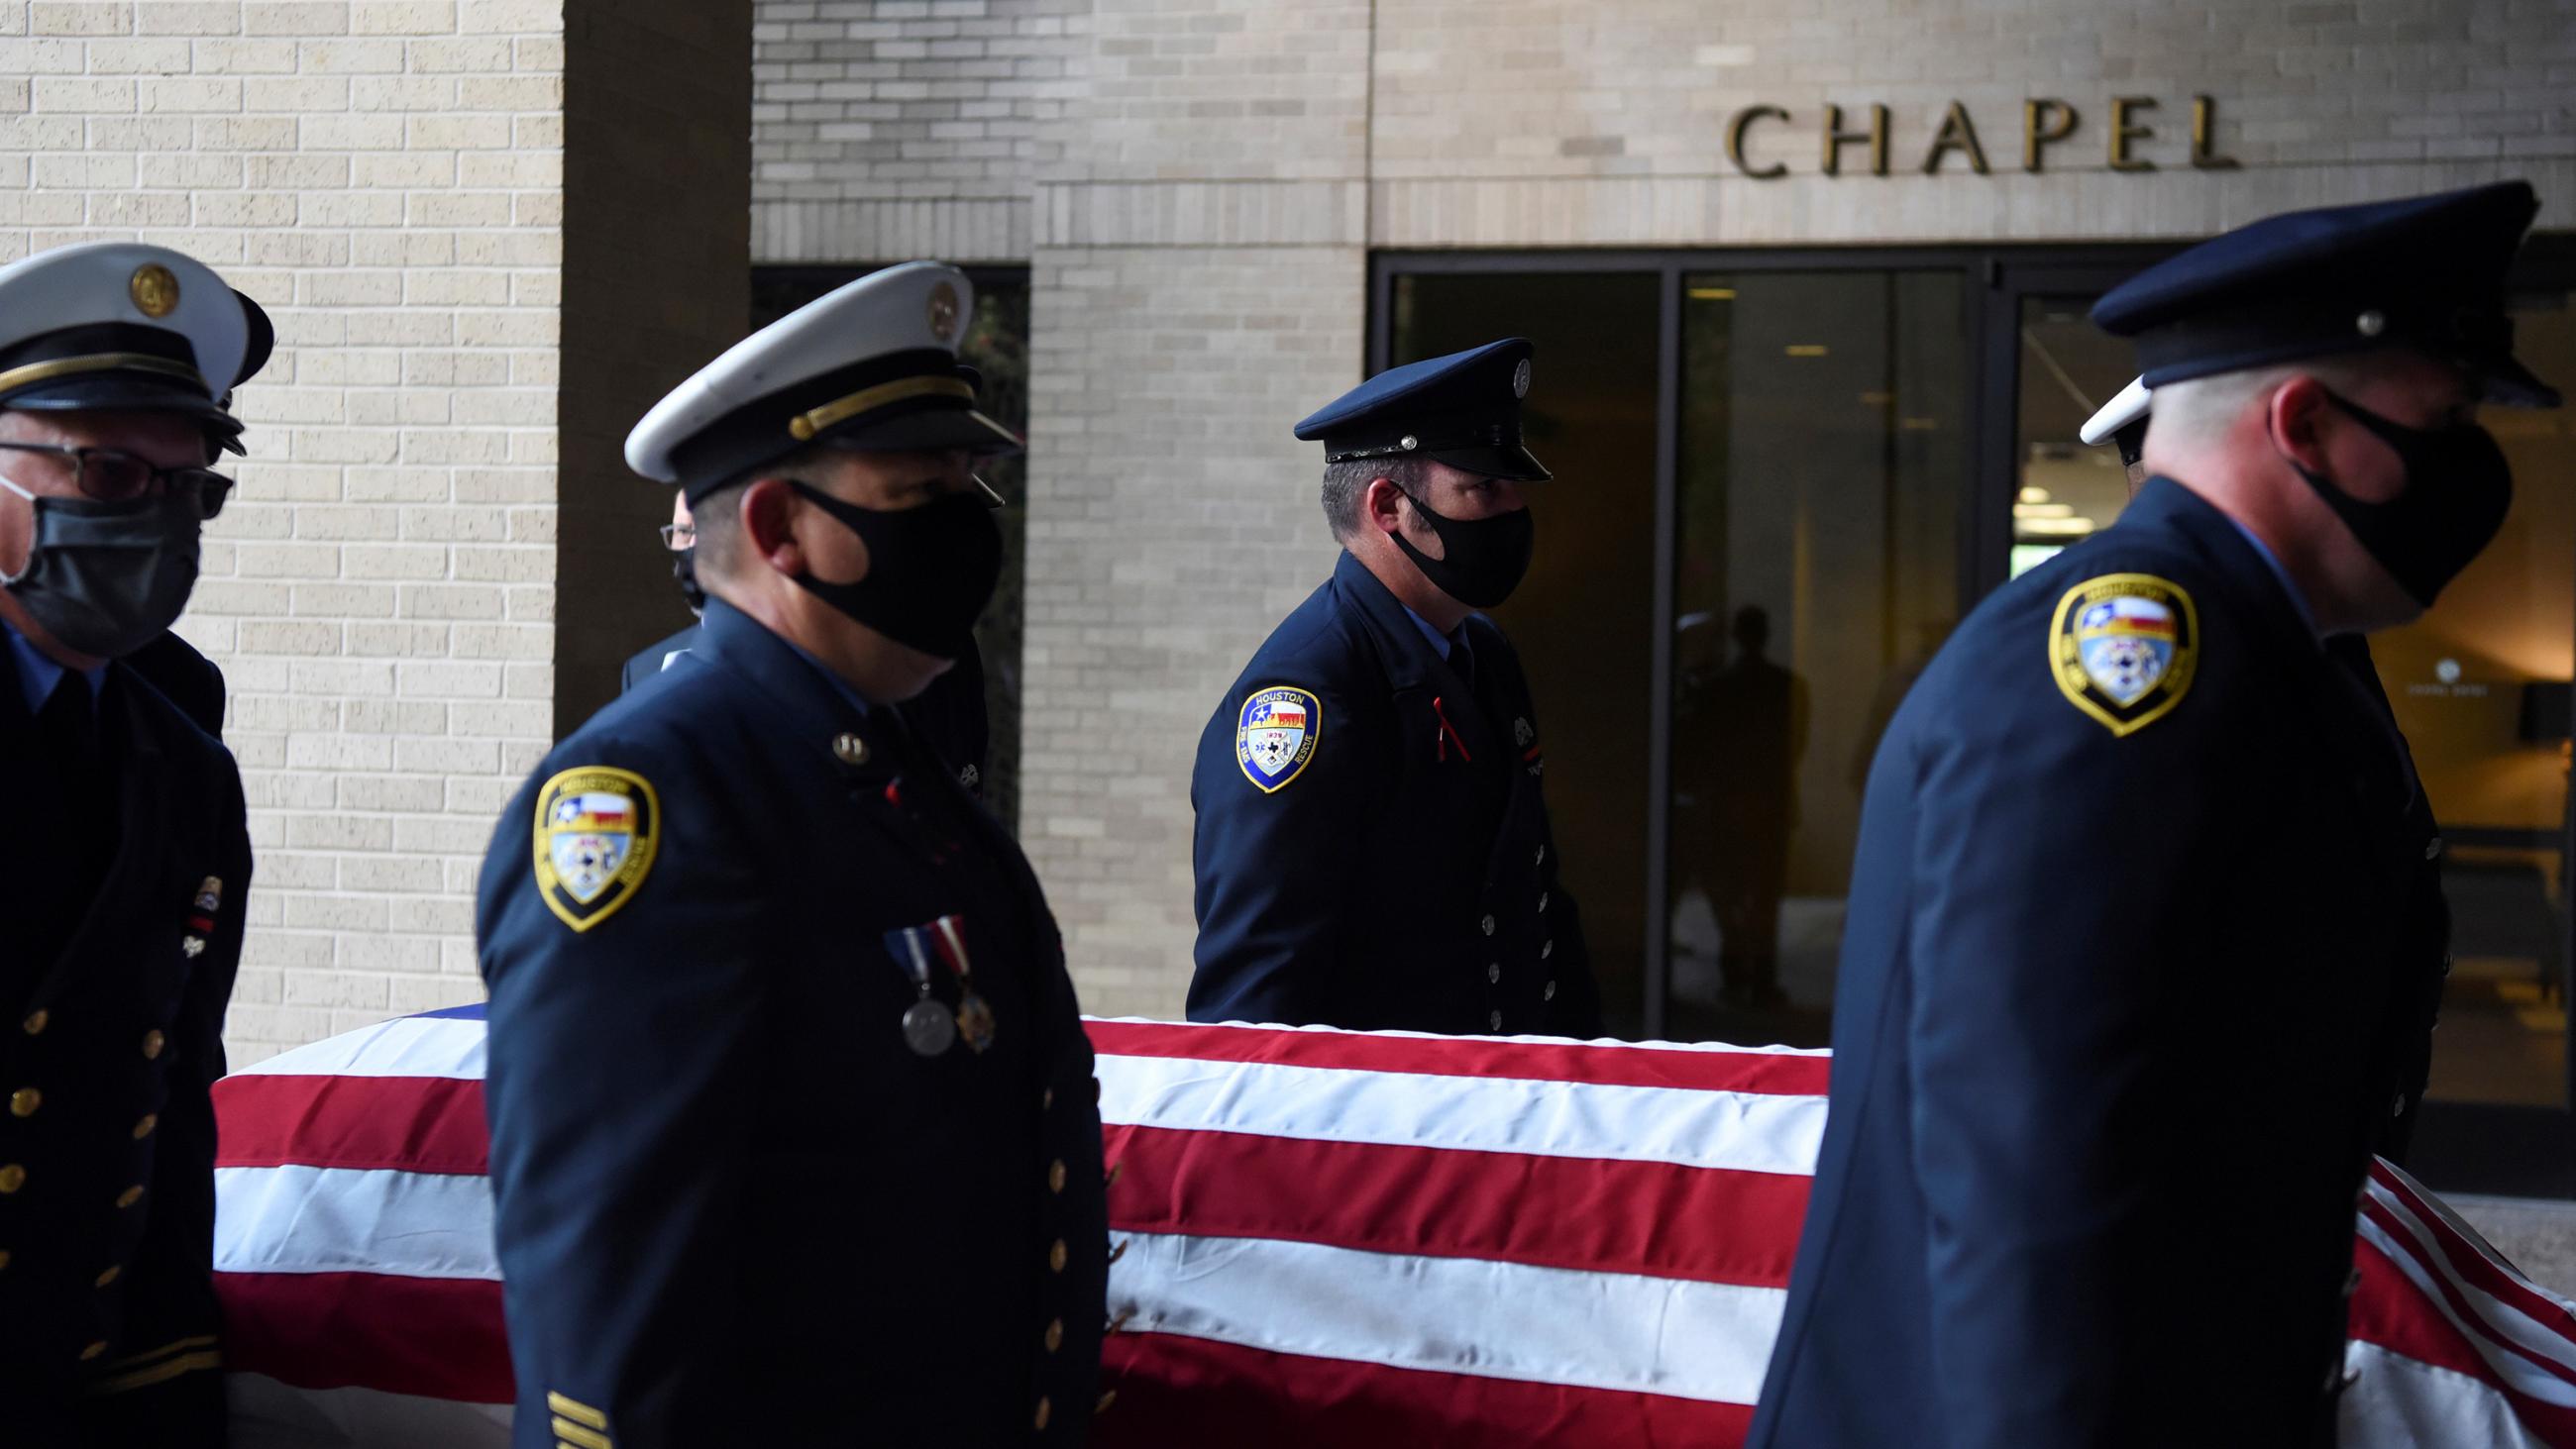 The photo shows a firefighter honor guard carrying a casket. 